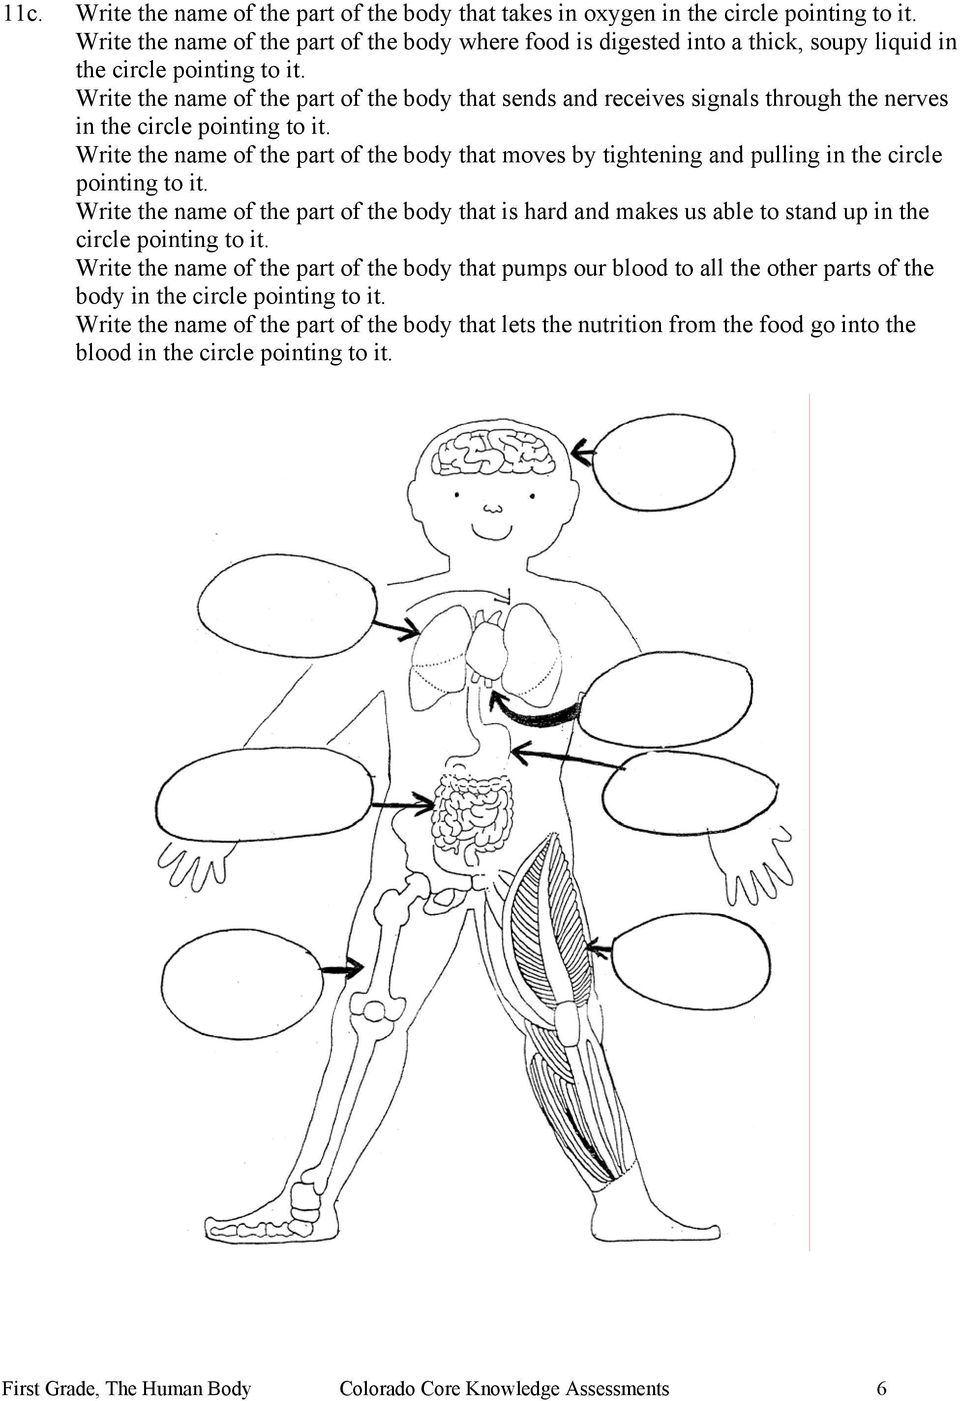 Write the name of the part of the body that sends and receives signals through the nerves in the circle pointing to it.